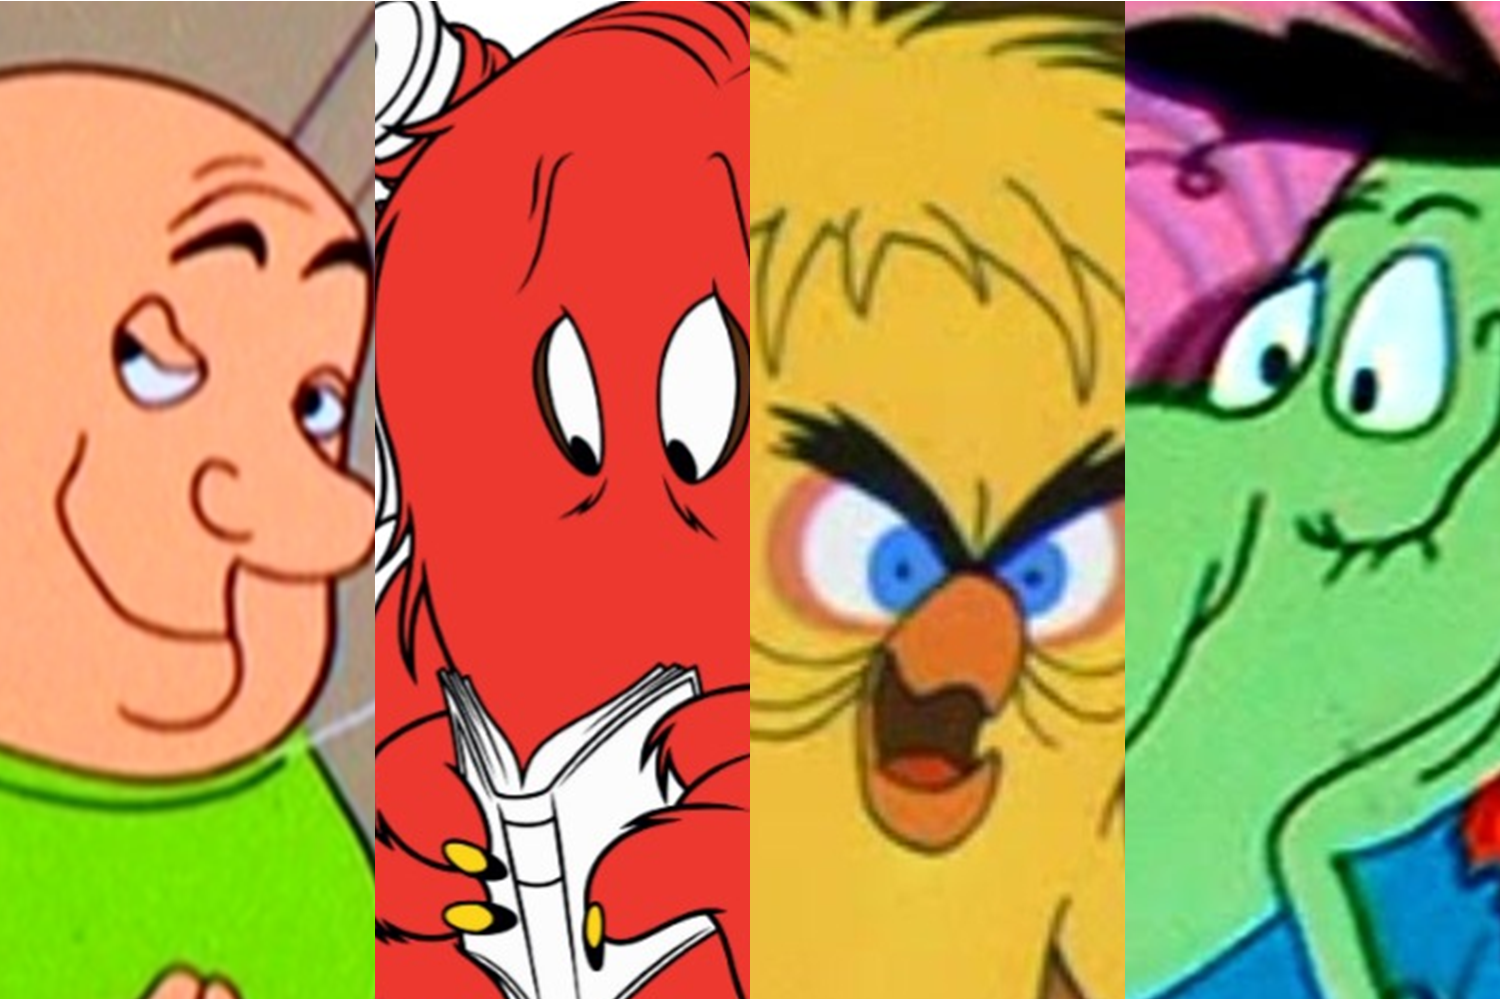 Mt. Rushmore of Secondary Looney Tunes Villains